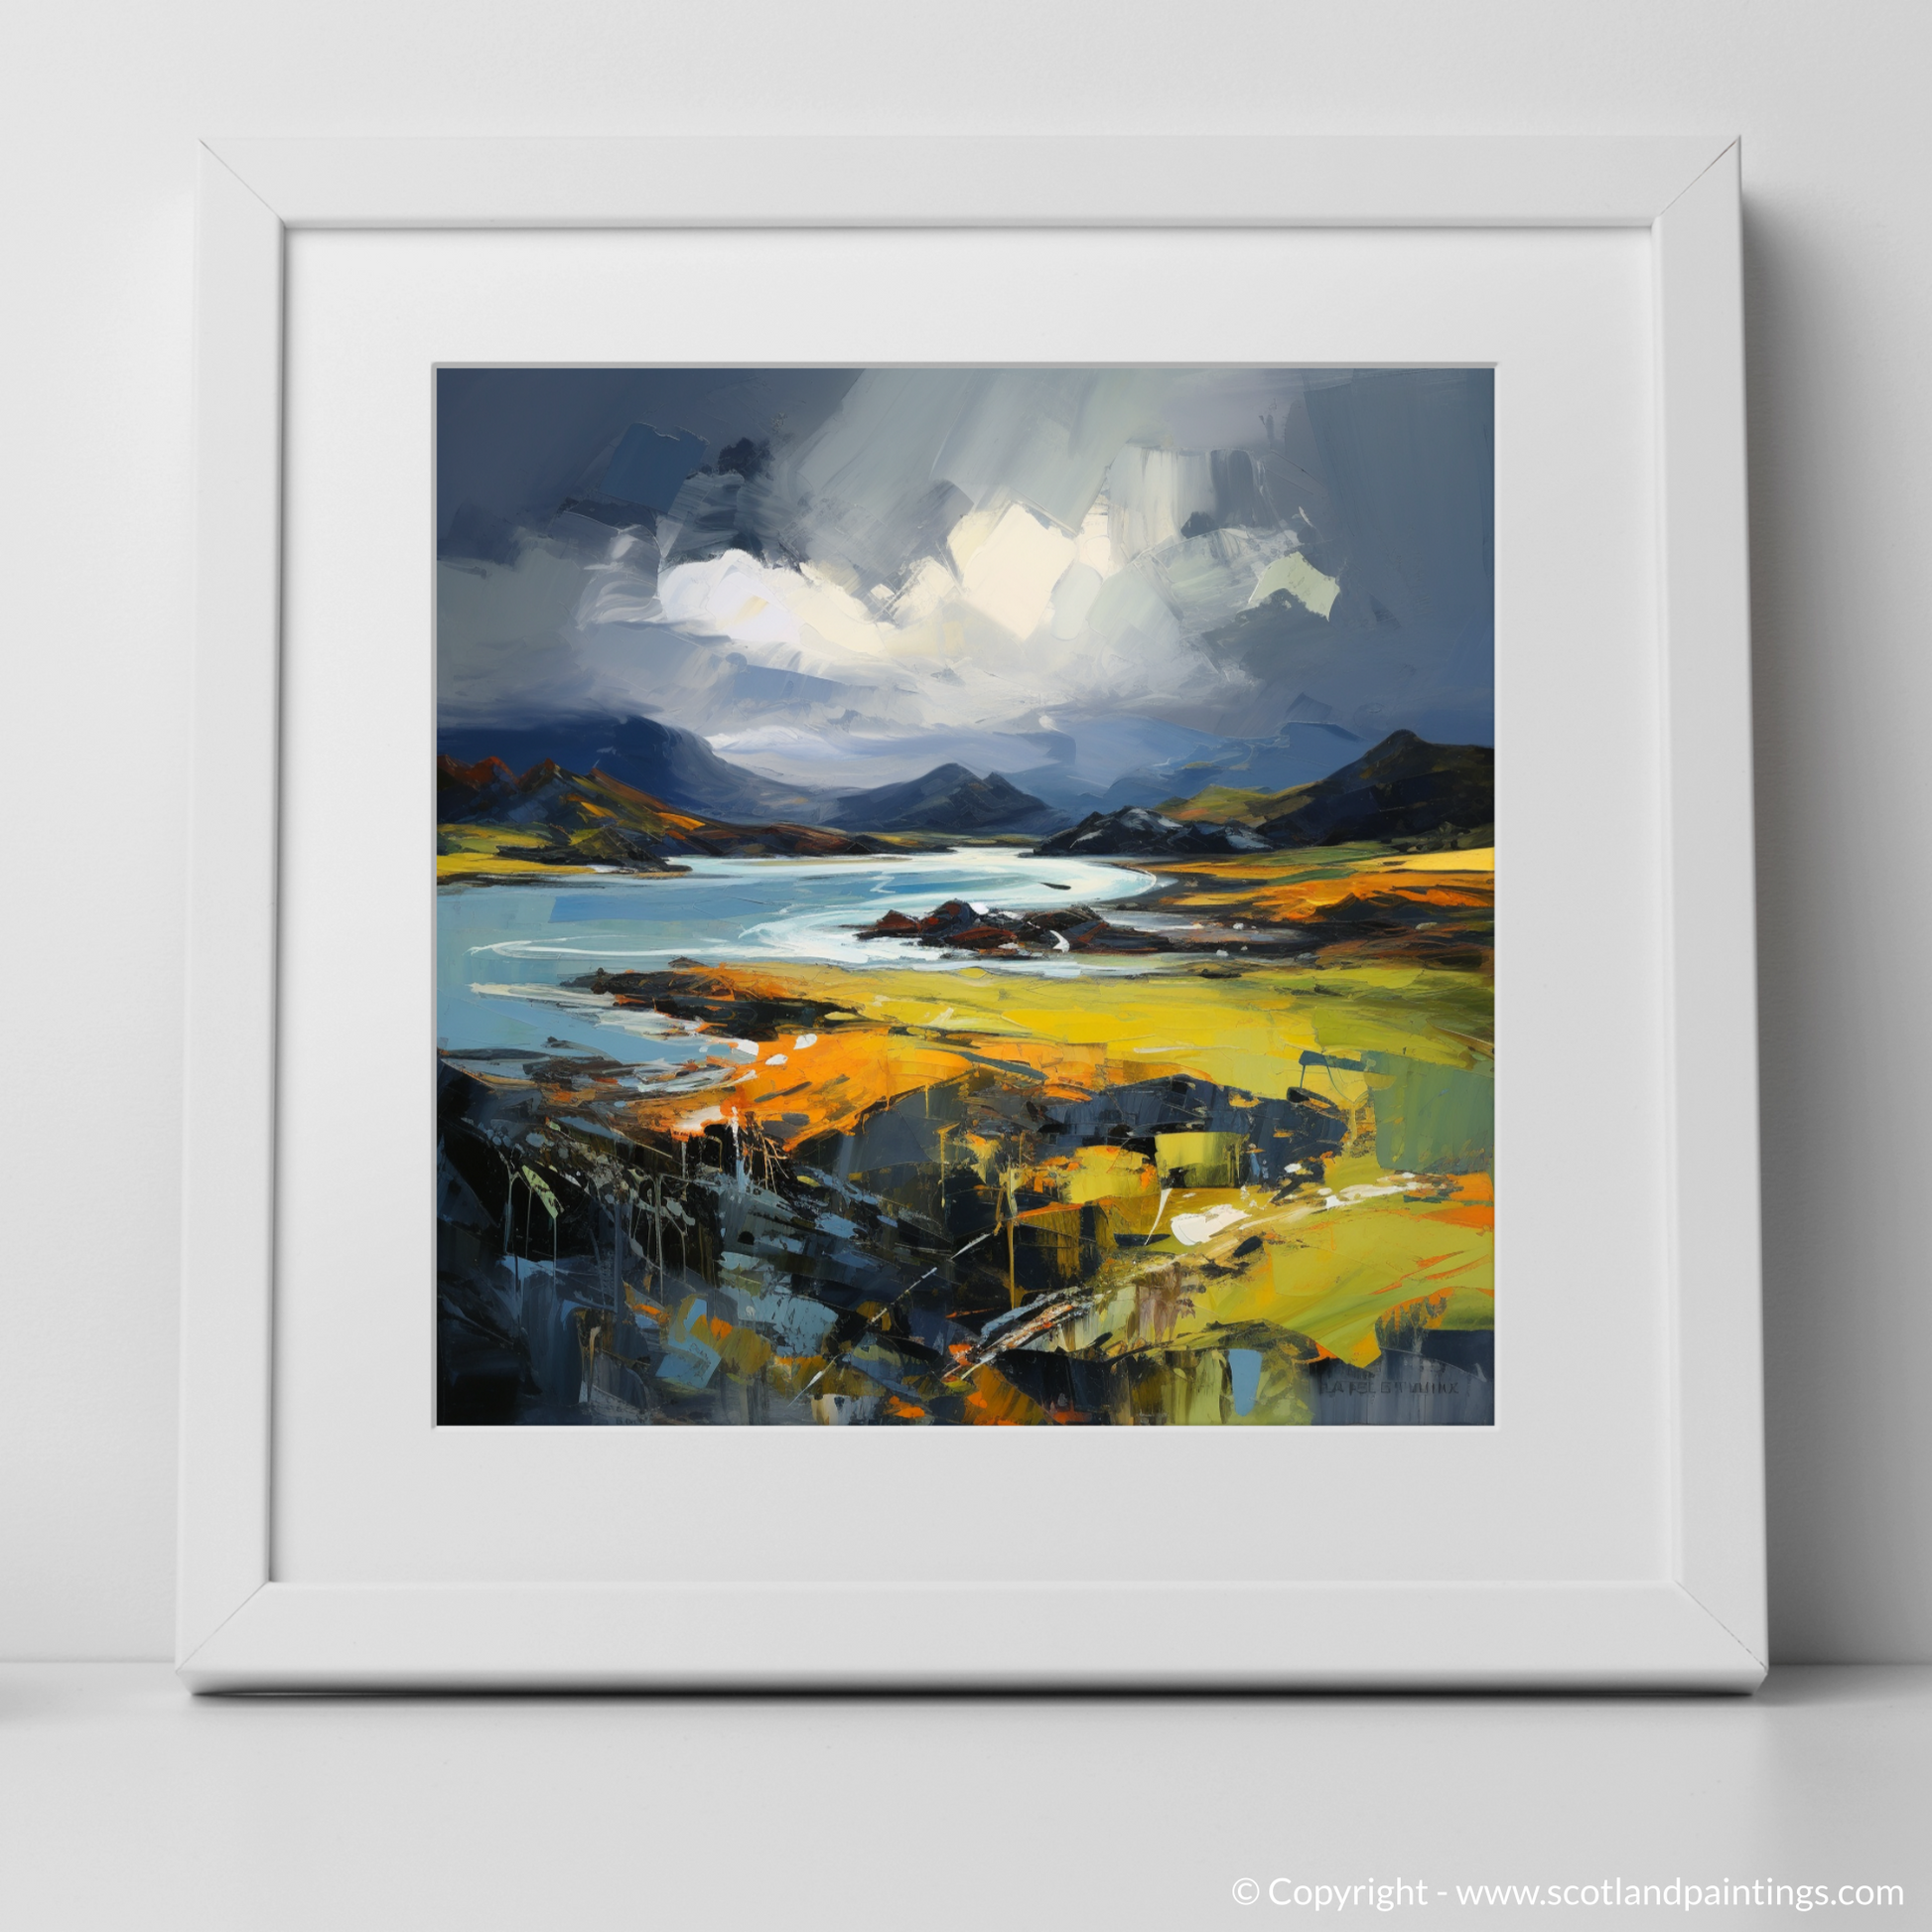 Art Print of Easdale Sound with a stormy sky with a white frame